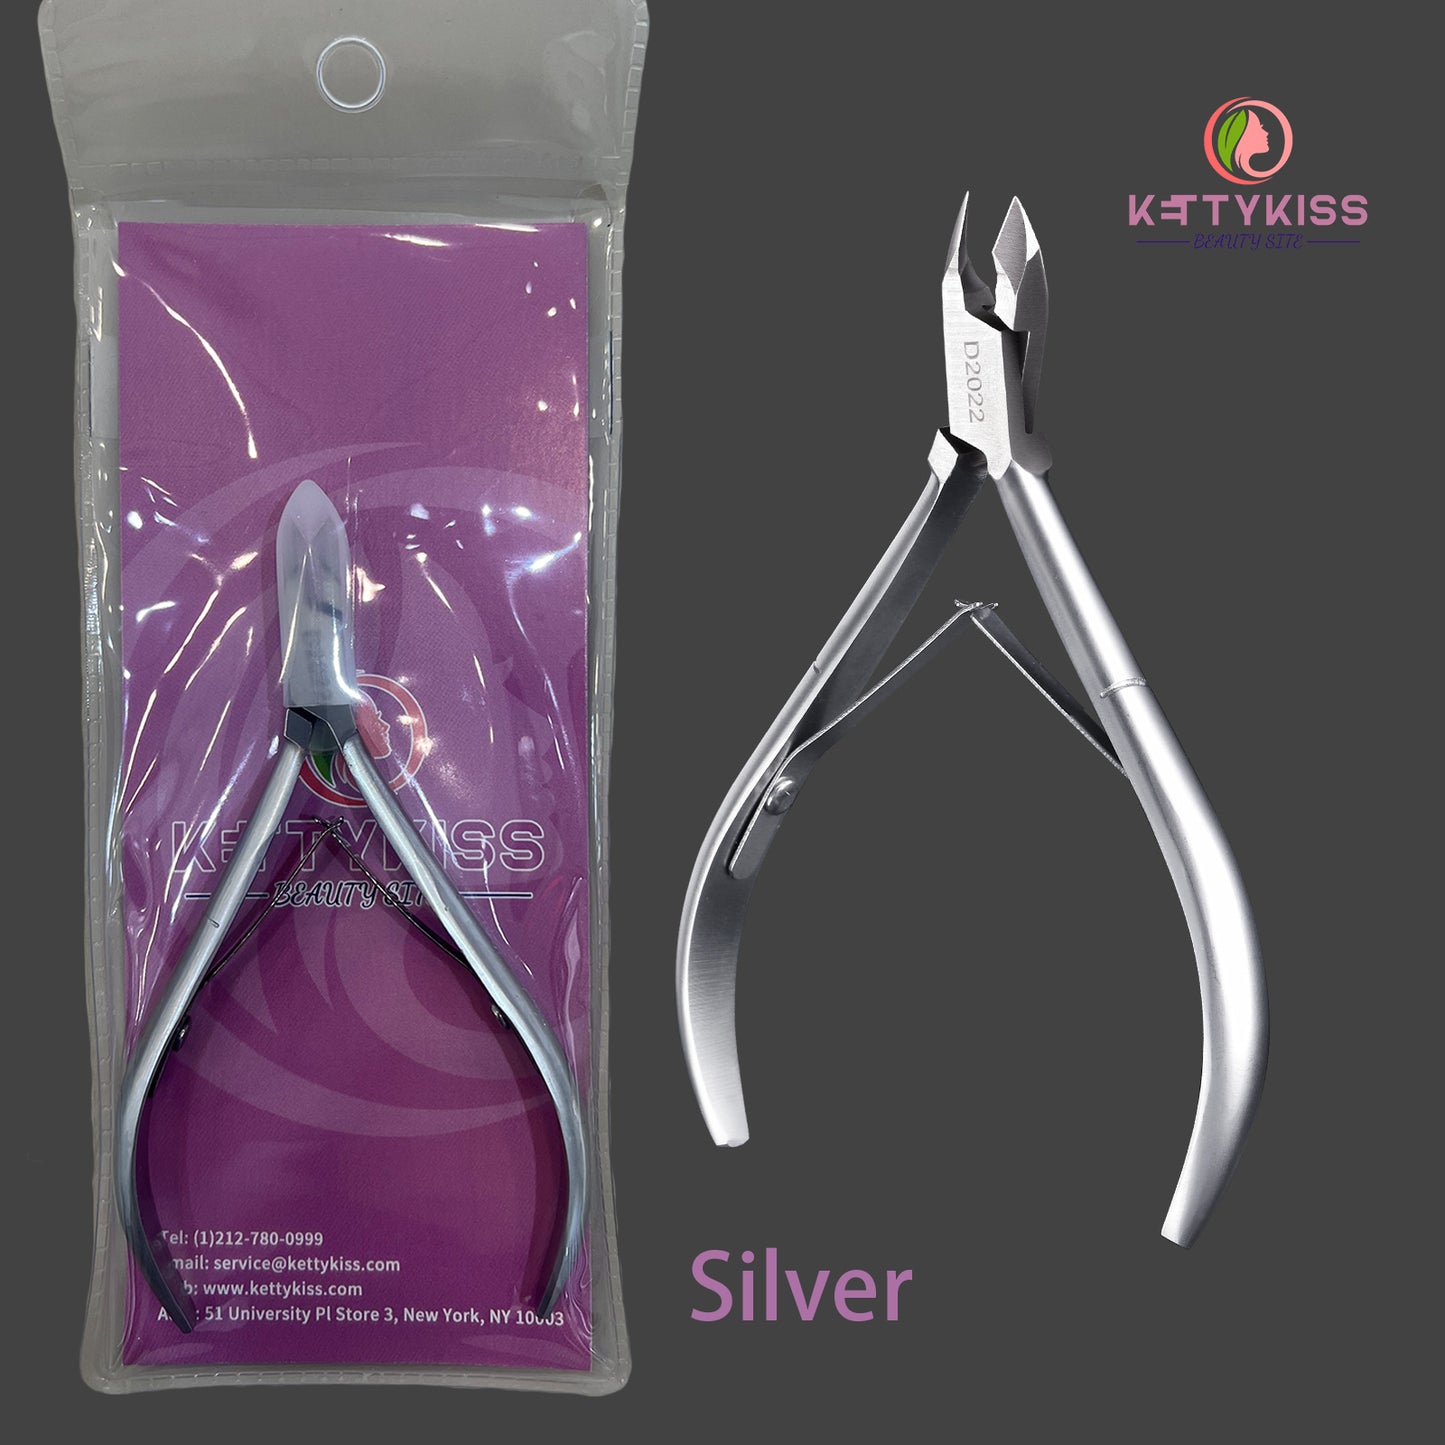 Kettykiss Sliver Gold Black Scissors Cuticle Nippers